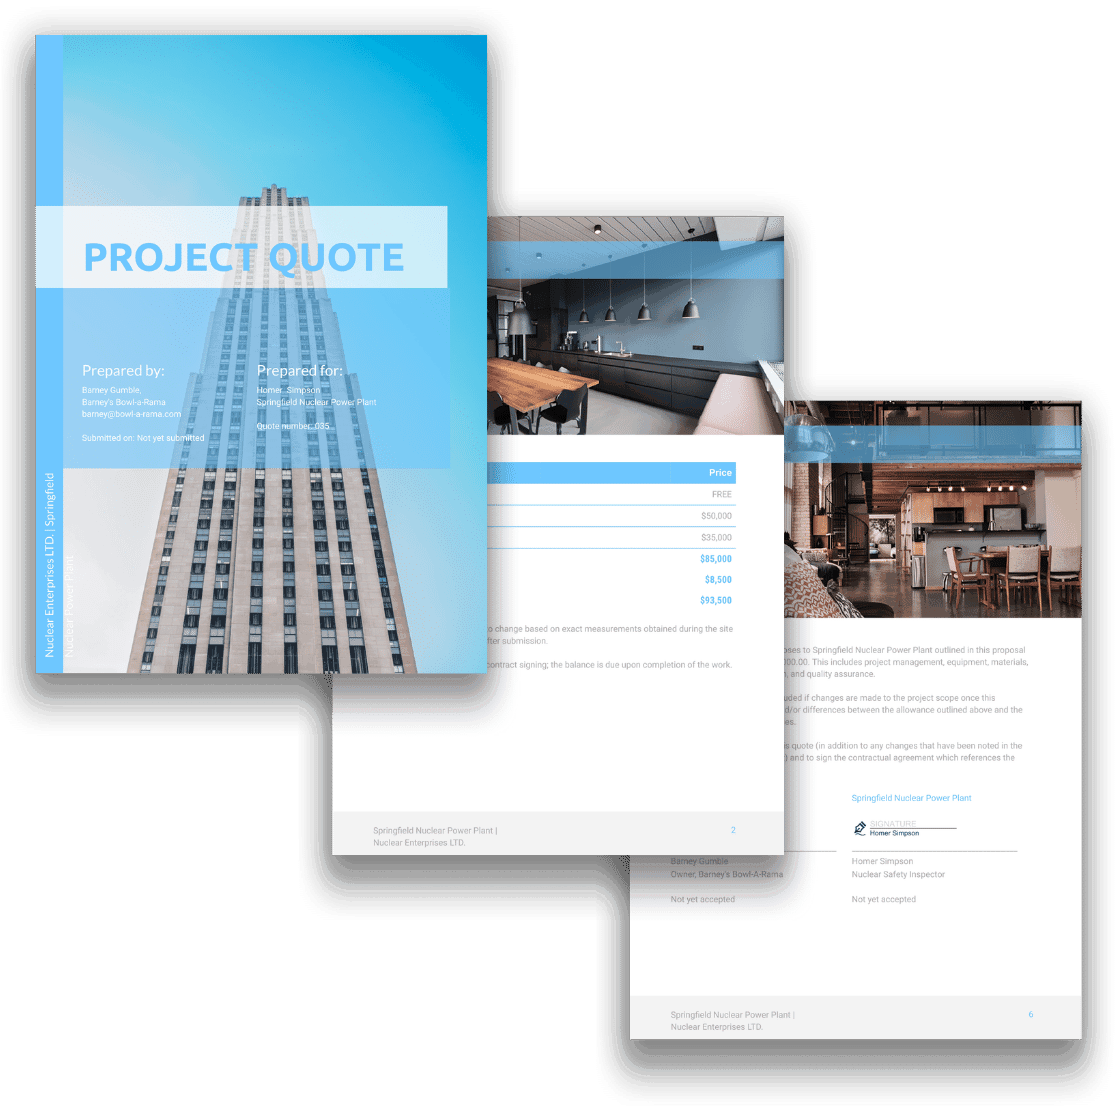 free project quote template